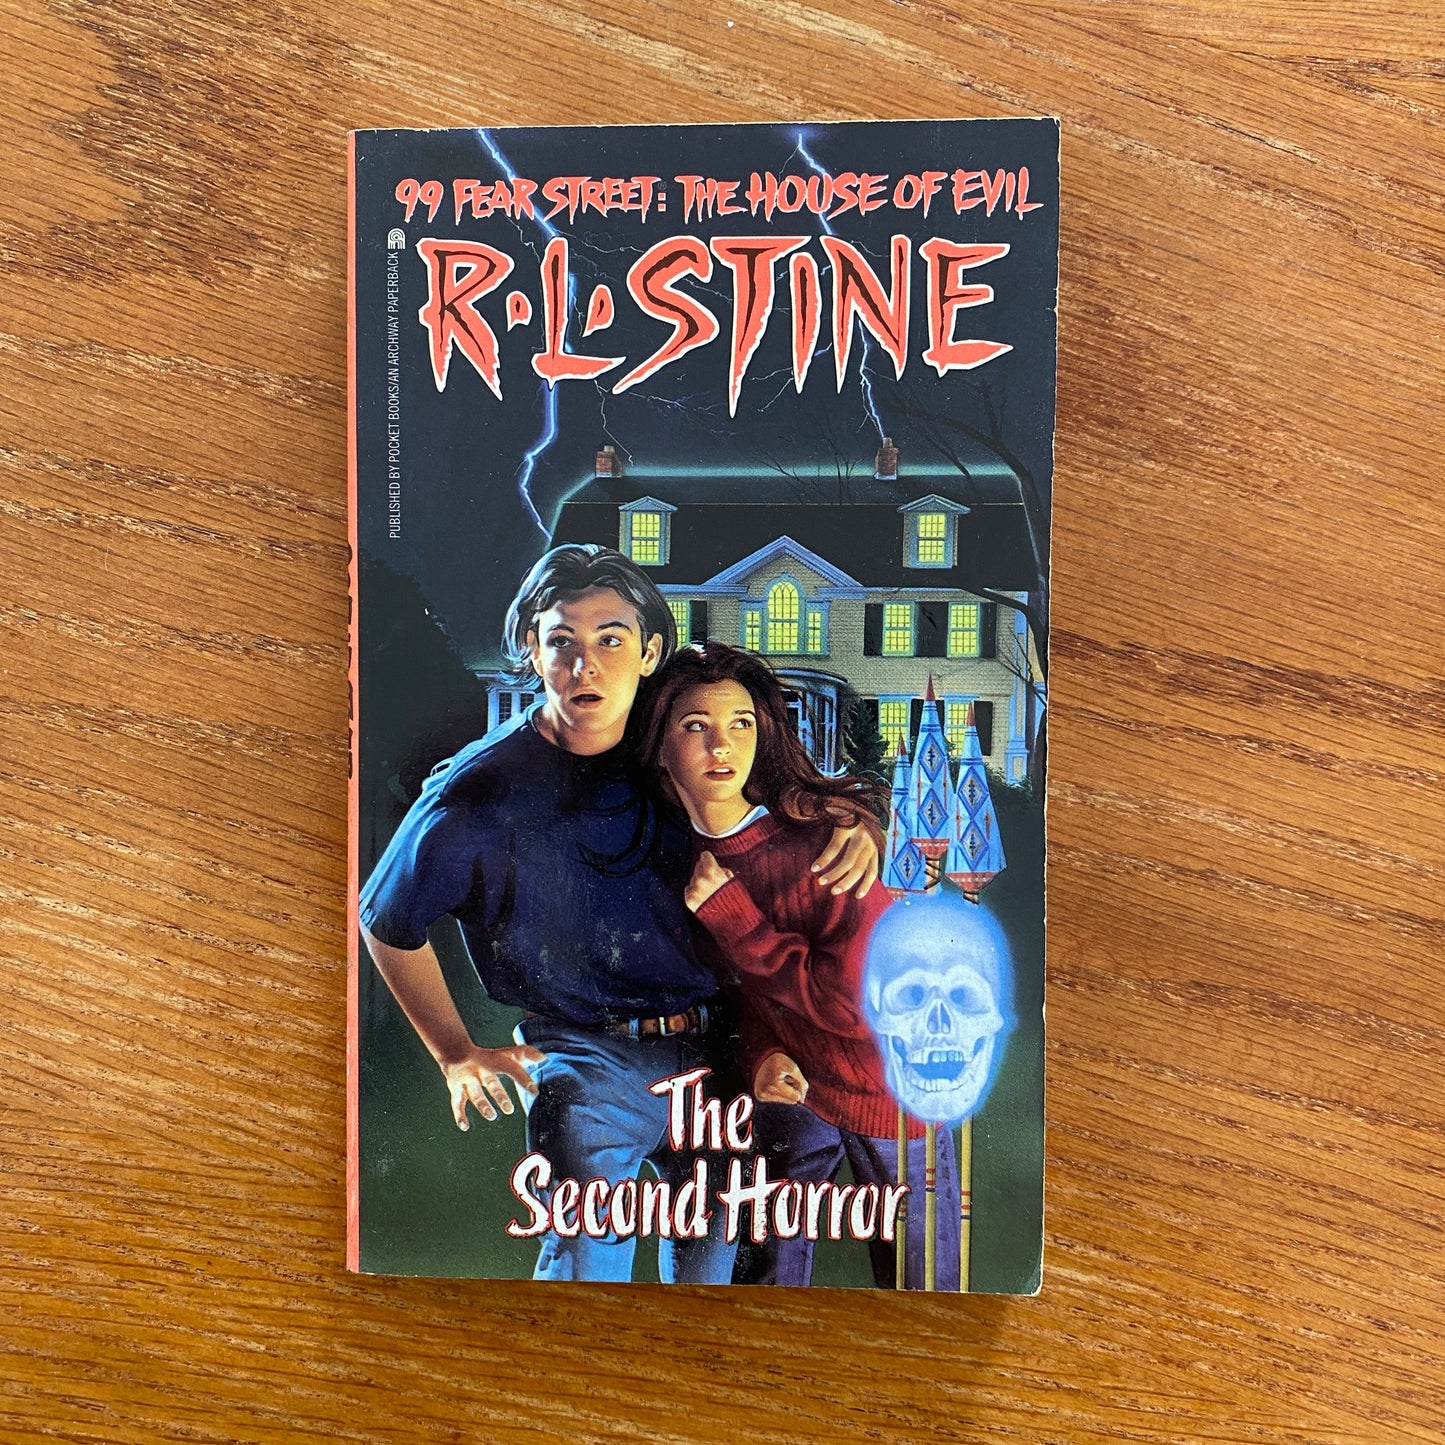 R.L Stine - 99 Fear Street The House Of Evil: The Second Horror